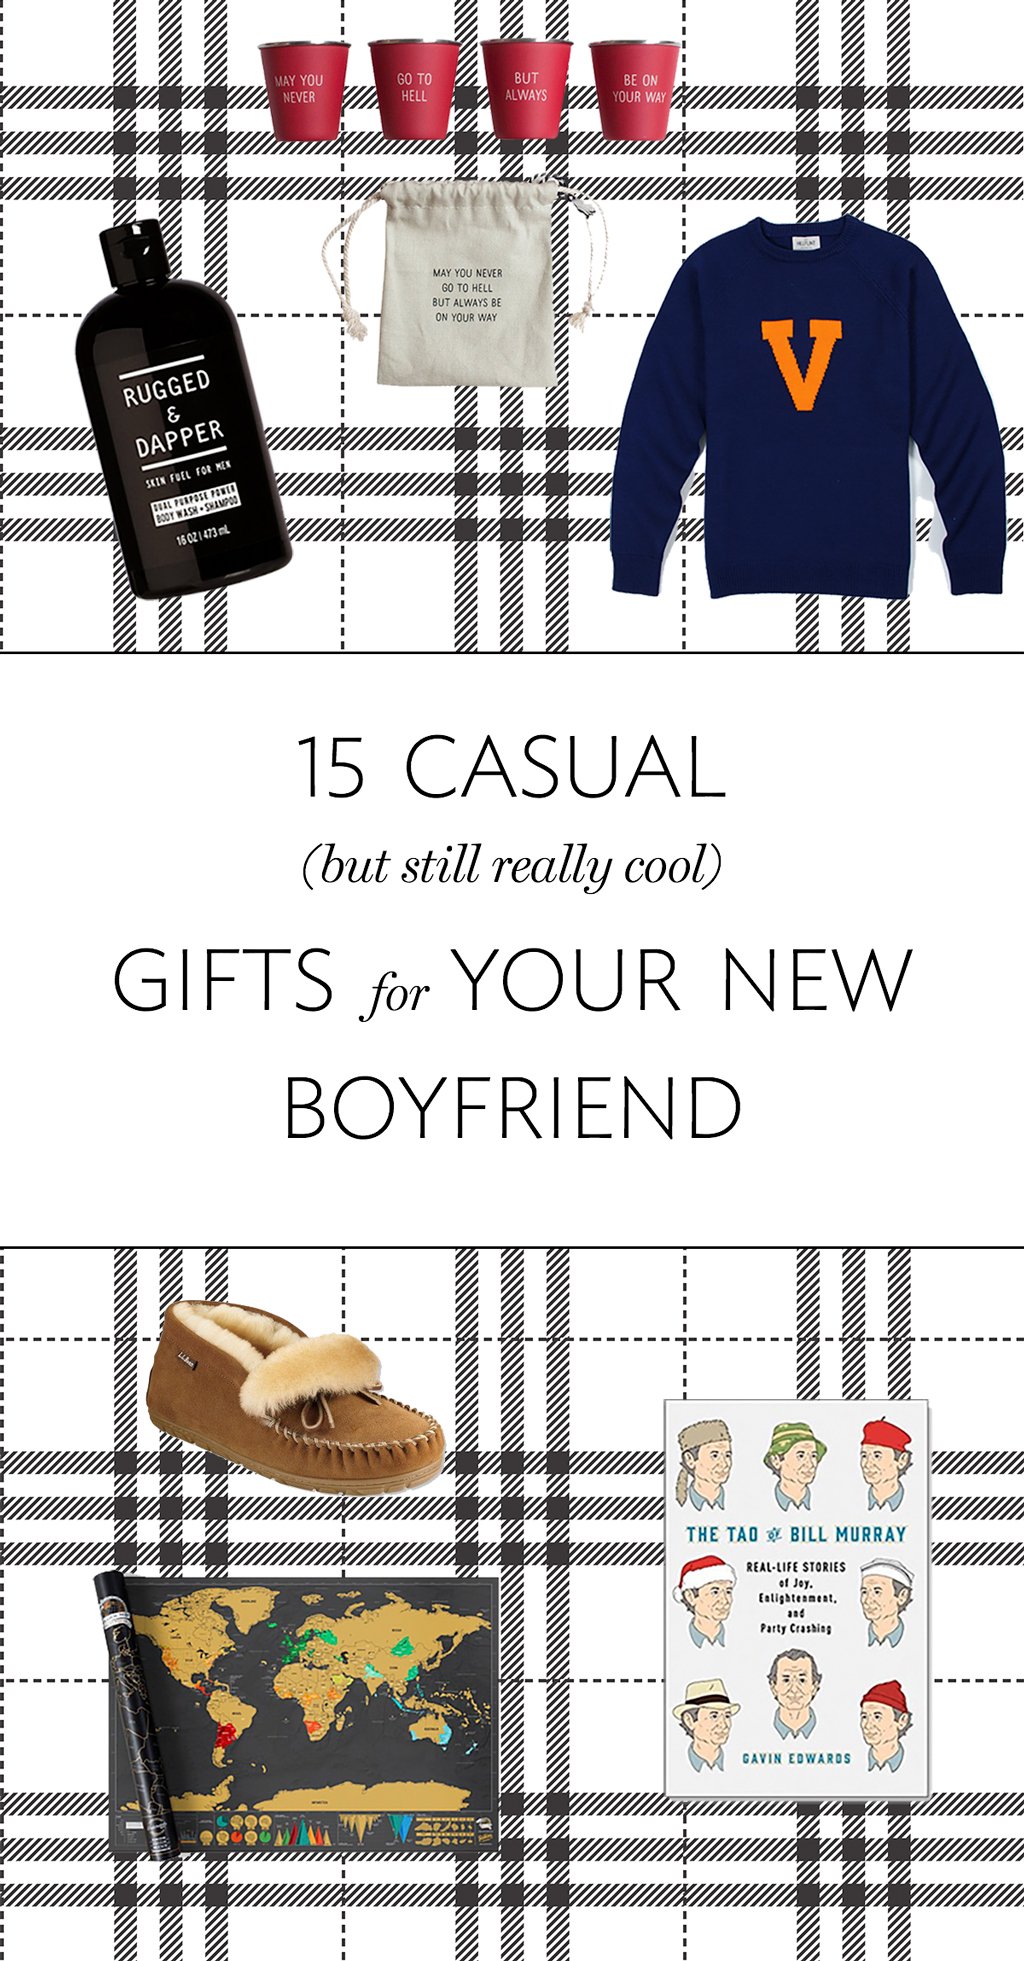 Inexpensive Boyfriend Gifts That Don't Look Cheap (Under $20)